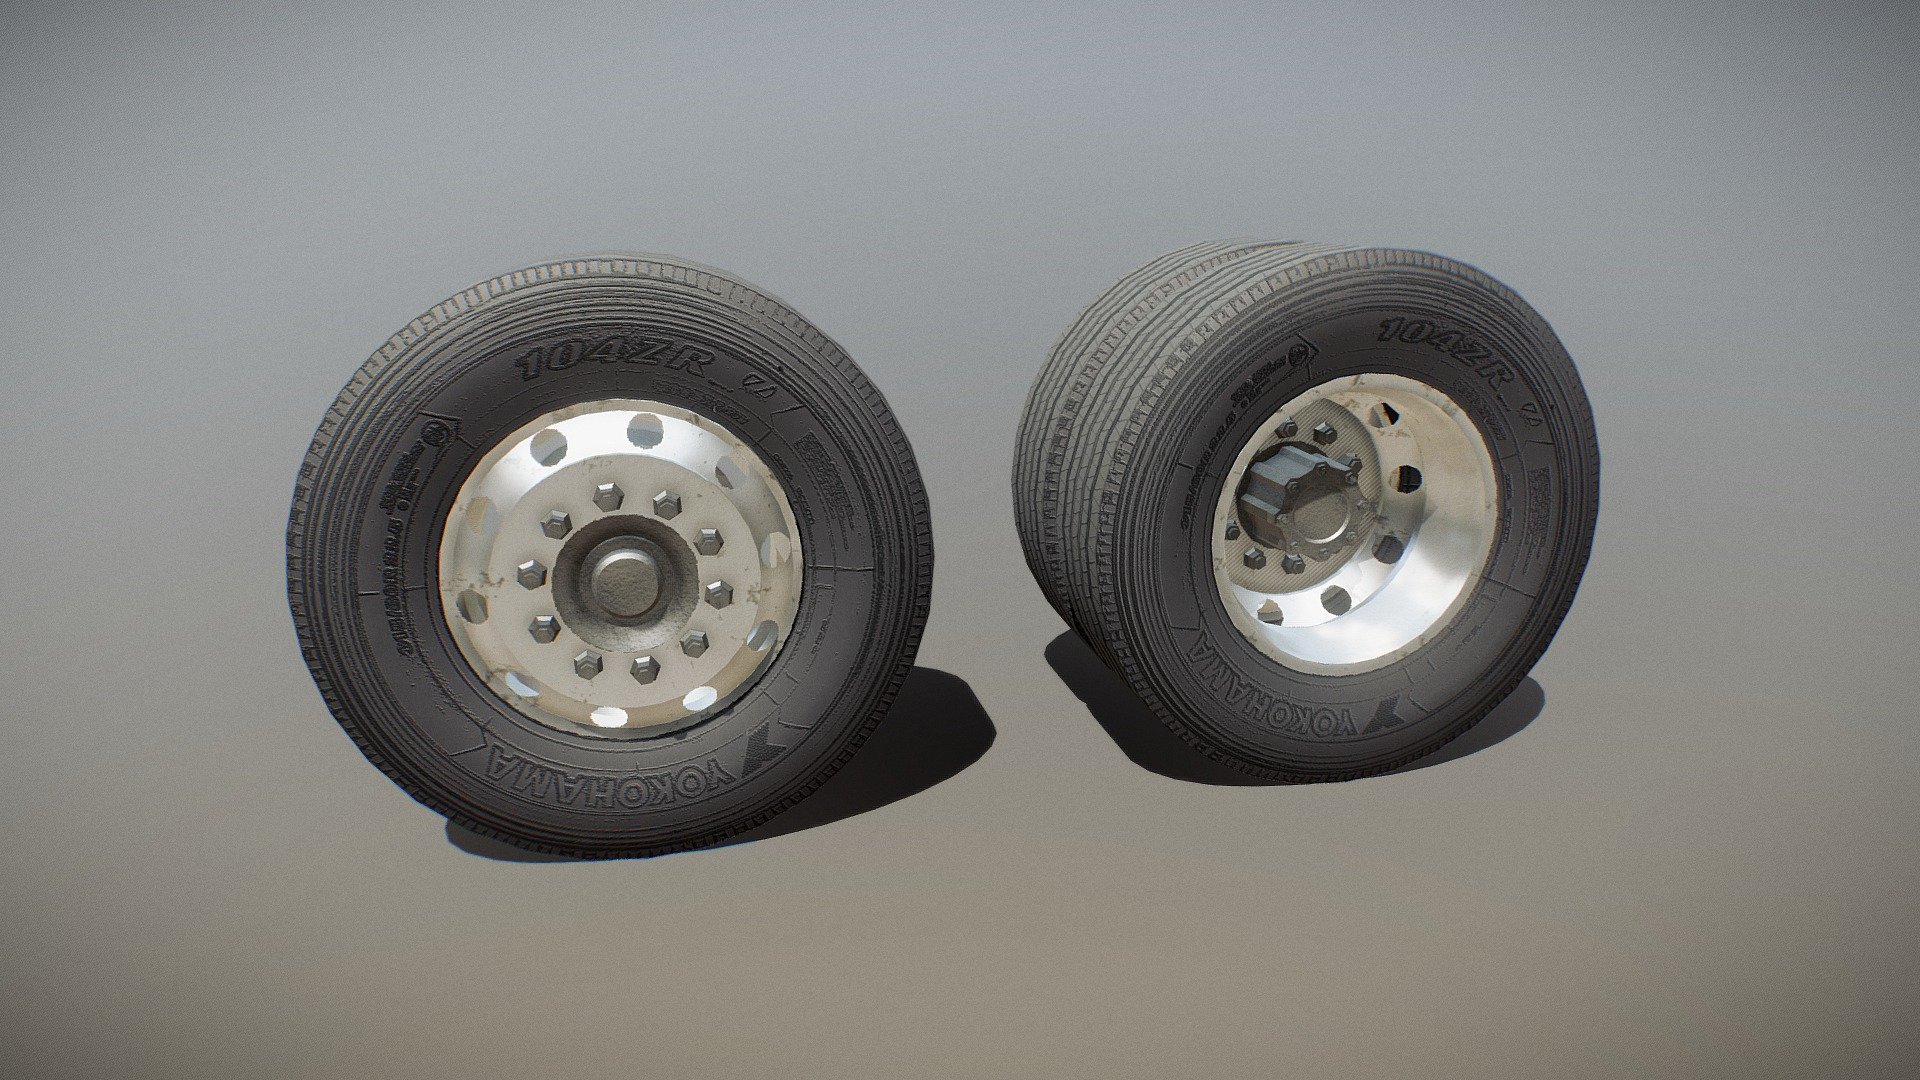 Truck_Wheels, size 315 80 R22.5, which can be mounted on the front and rear axle, steering and traction, of the most varied types of truck, (Tractor Day Cab, Bulk Truck, Straight Truck, Delivery Truck, Tour Bus).

Dimensions - Total diameter 100 cm - Width 31.5 cm - Rim diameter 57 cm.

Textures - 1k, Clean and dirt version.

Count of faces and vertices:

Single wheel without hub - 512 verts - 513 faces -1054 tris

Double wheel without hub - 1024 verts - 1026 faces - 2108 tris

Front hub - 680 verts - 610 faces - 1316 tris

Rear hub - 808 verts - 698 faces - 1508 tris - Truck Wheels - Download Free 3D model by HGowl (@hgowl22) 3d model